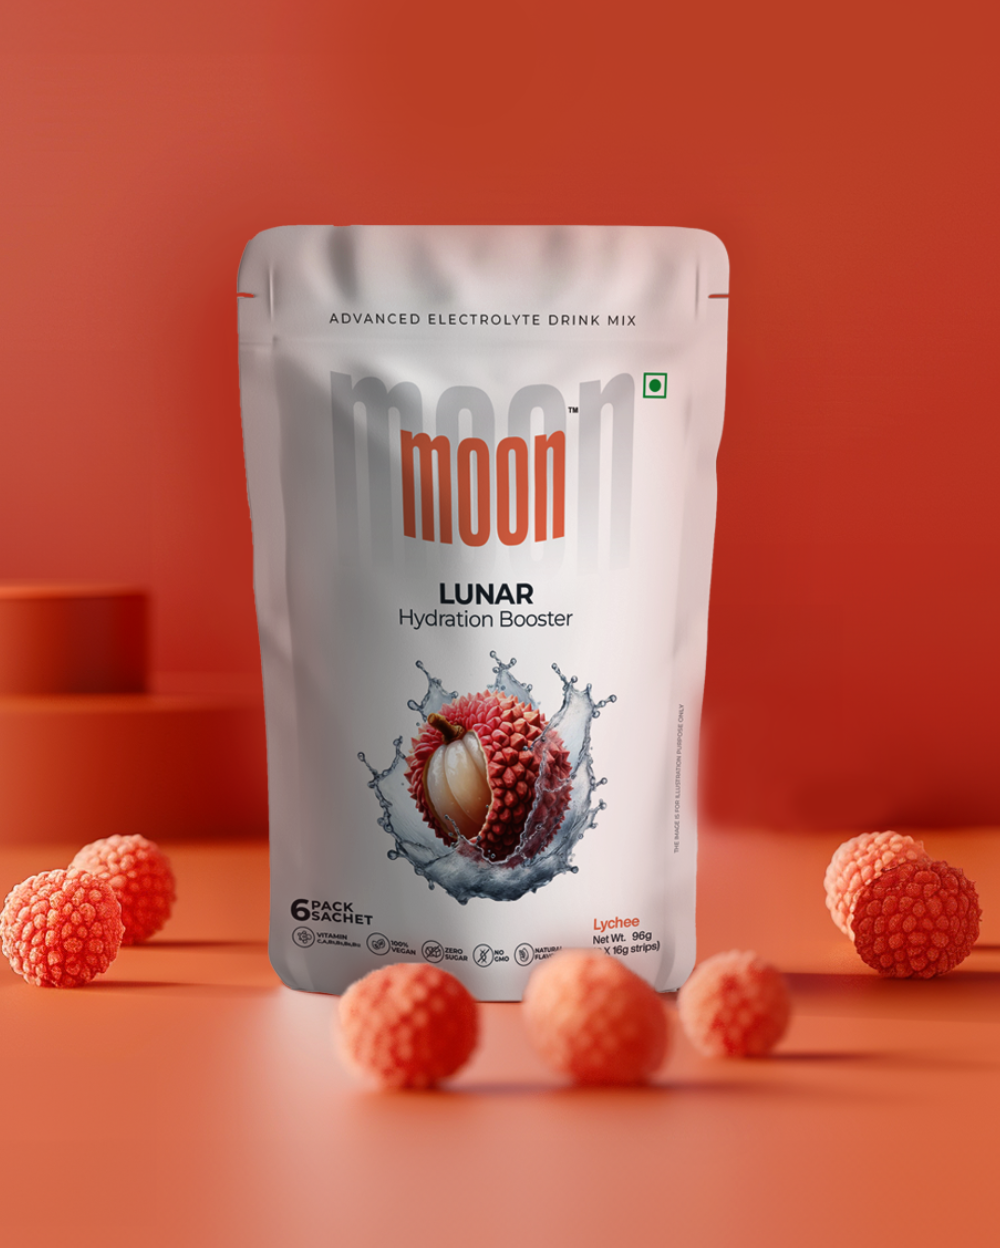 A pouch of Moon Lunar Watermelon + Lychee Hydration Booster by MOONFREEZE FOODS PRIVATE LIMITED, in lychee flavor, surrounded by fresh lychee fruits on an orange background, offering exotic refreshment.